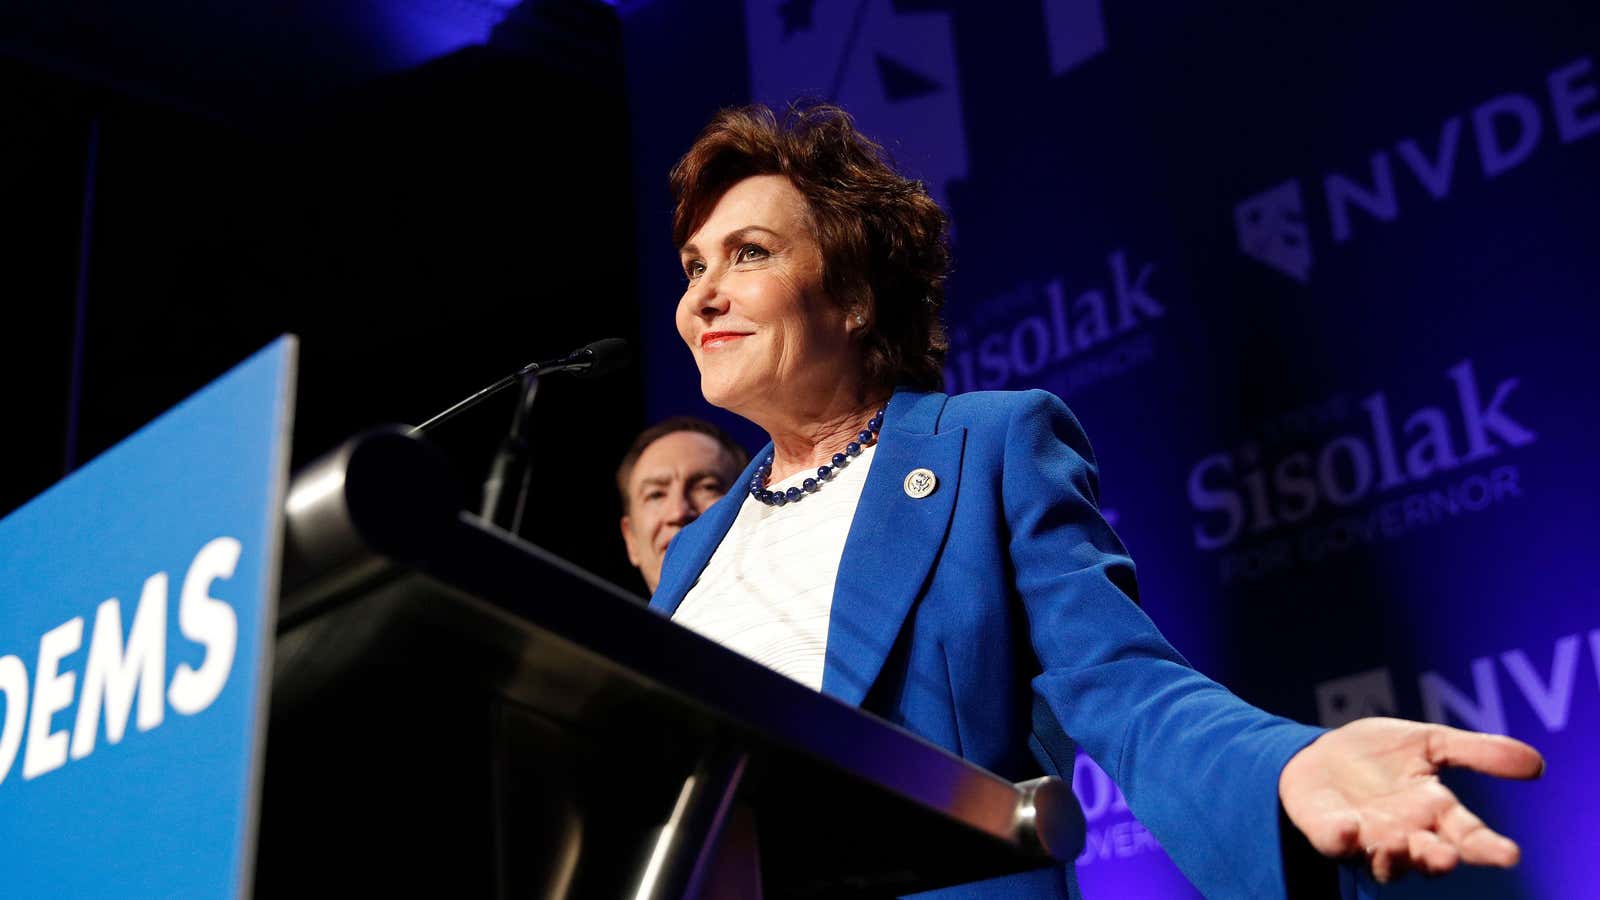 Jacky Rosen, a former computer scientist, is now a senator-elect of Nevada.